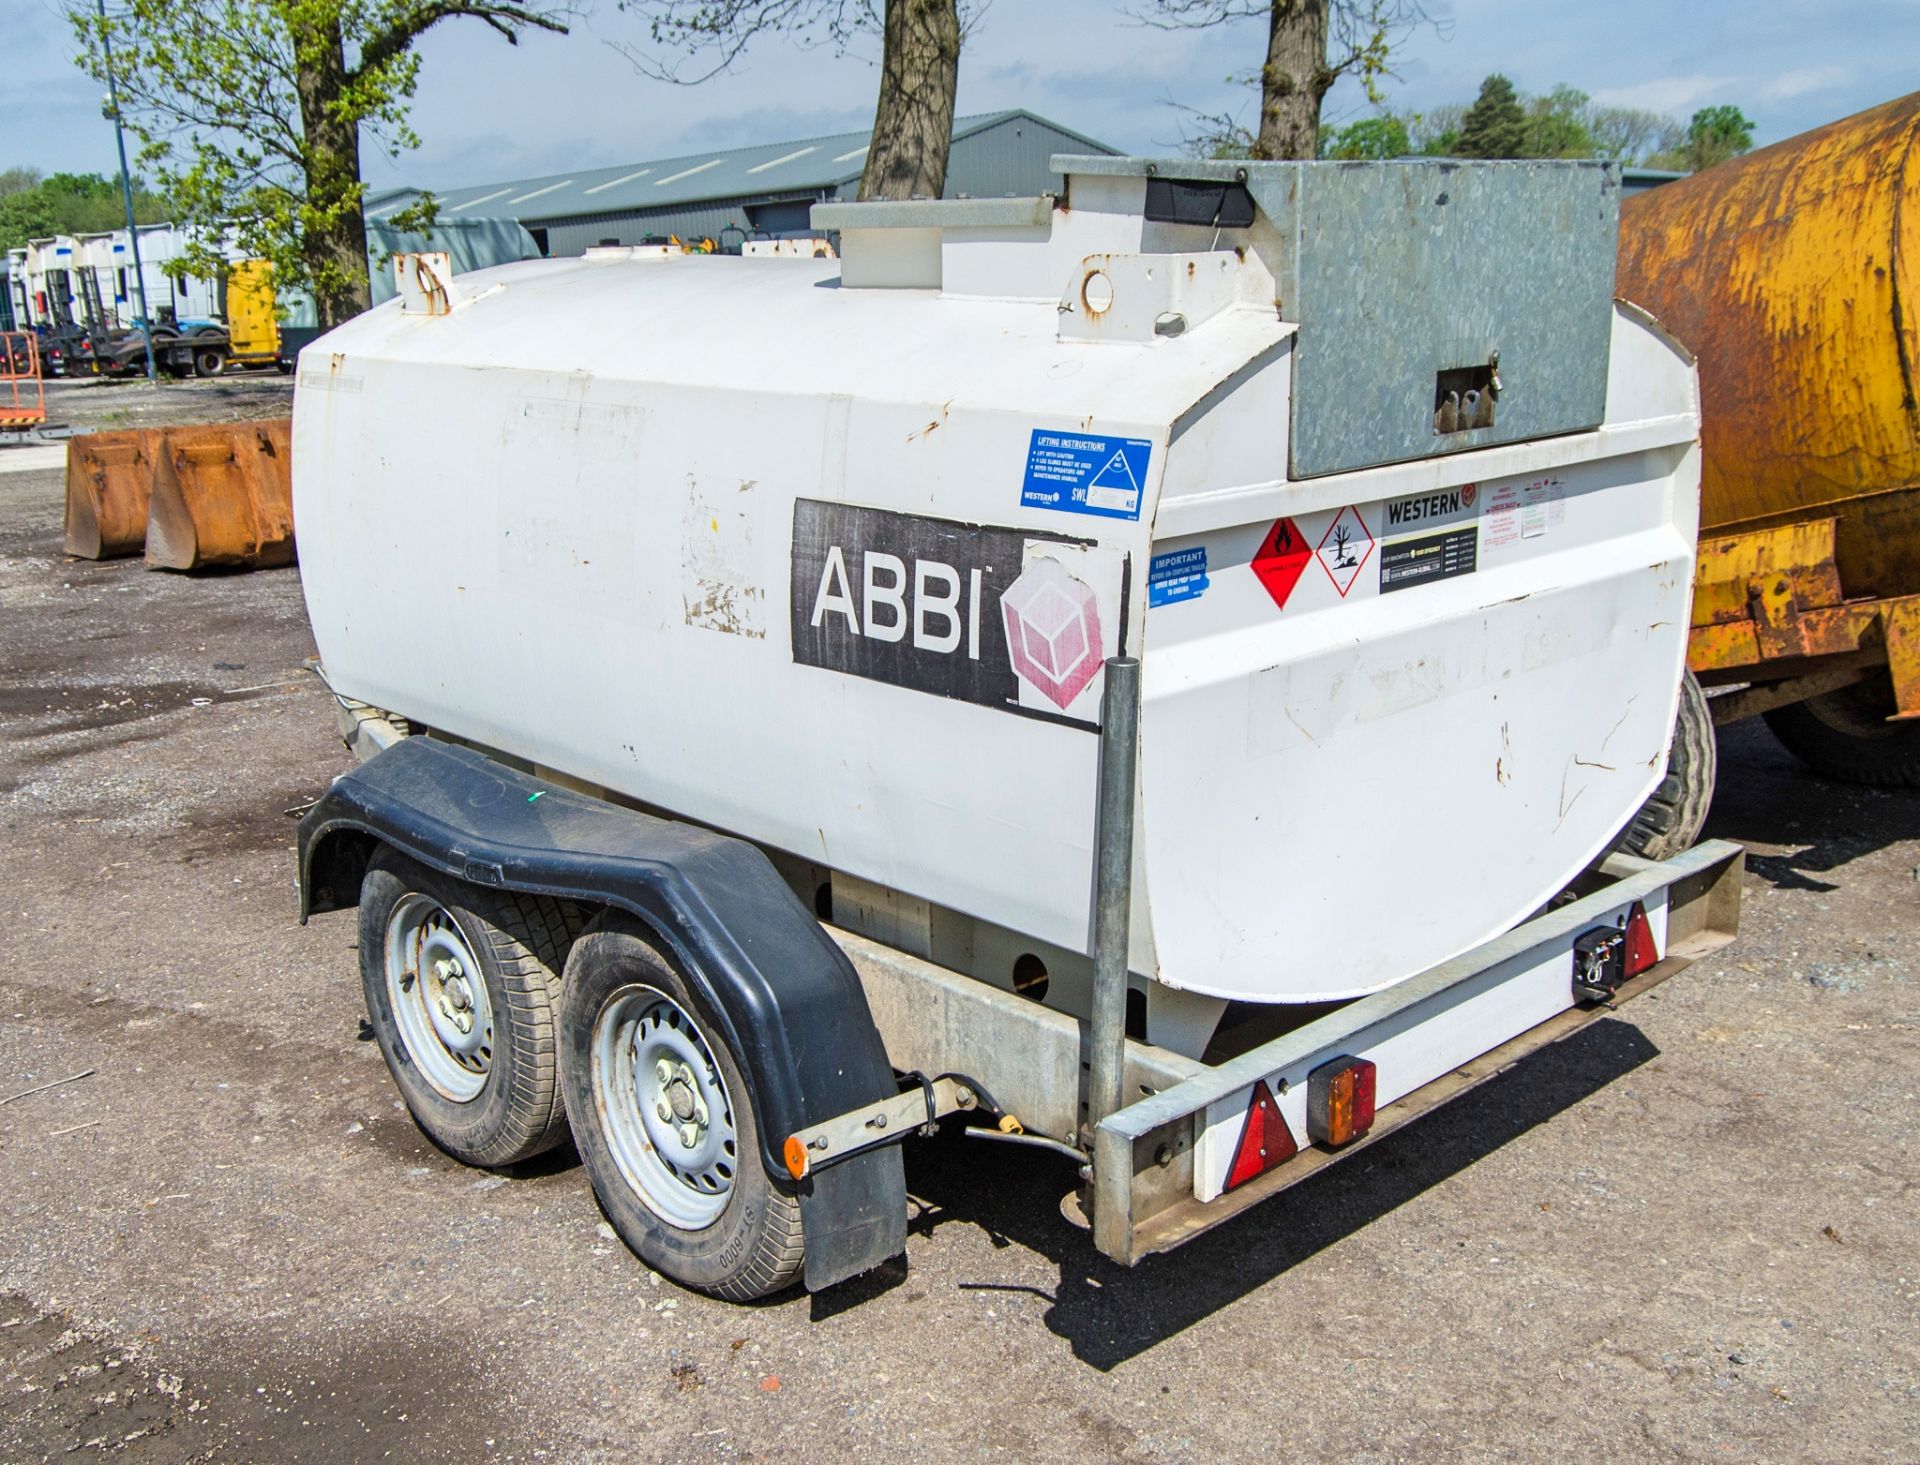 Western Abbi 2000 litre tandem axle fast tow mobile fuel bowser c/w manual pump, delivery hose & - Image 8 of 14